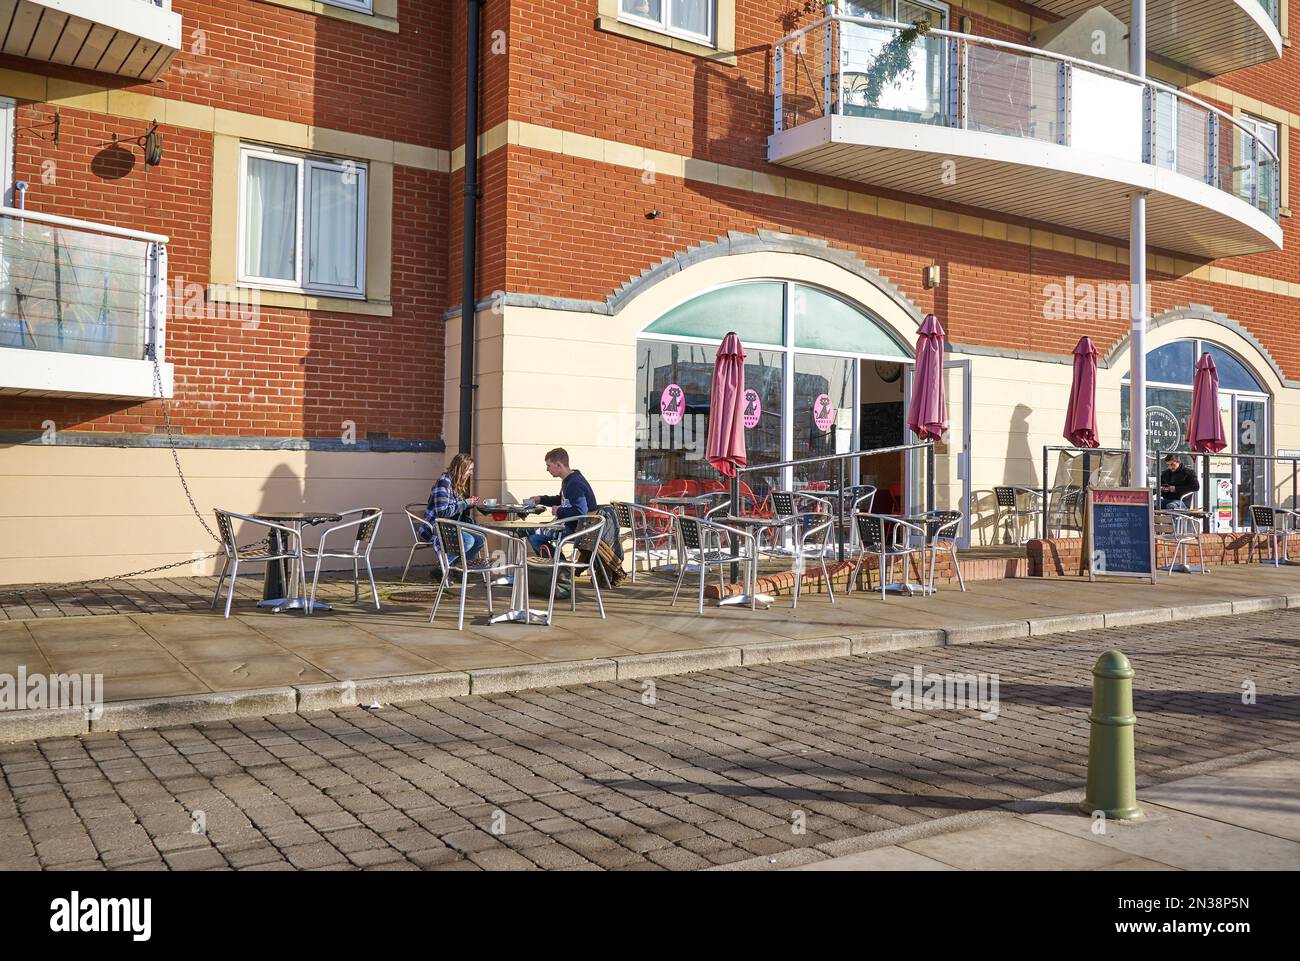 People outside a waterfront cafe at Ipswich Marina Stock Photo